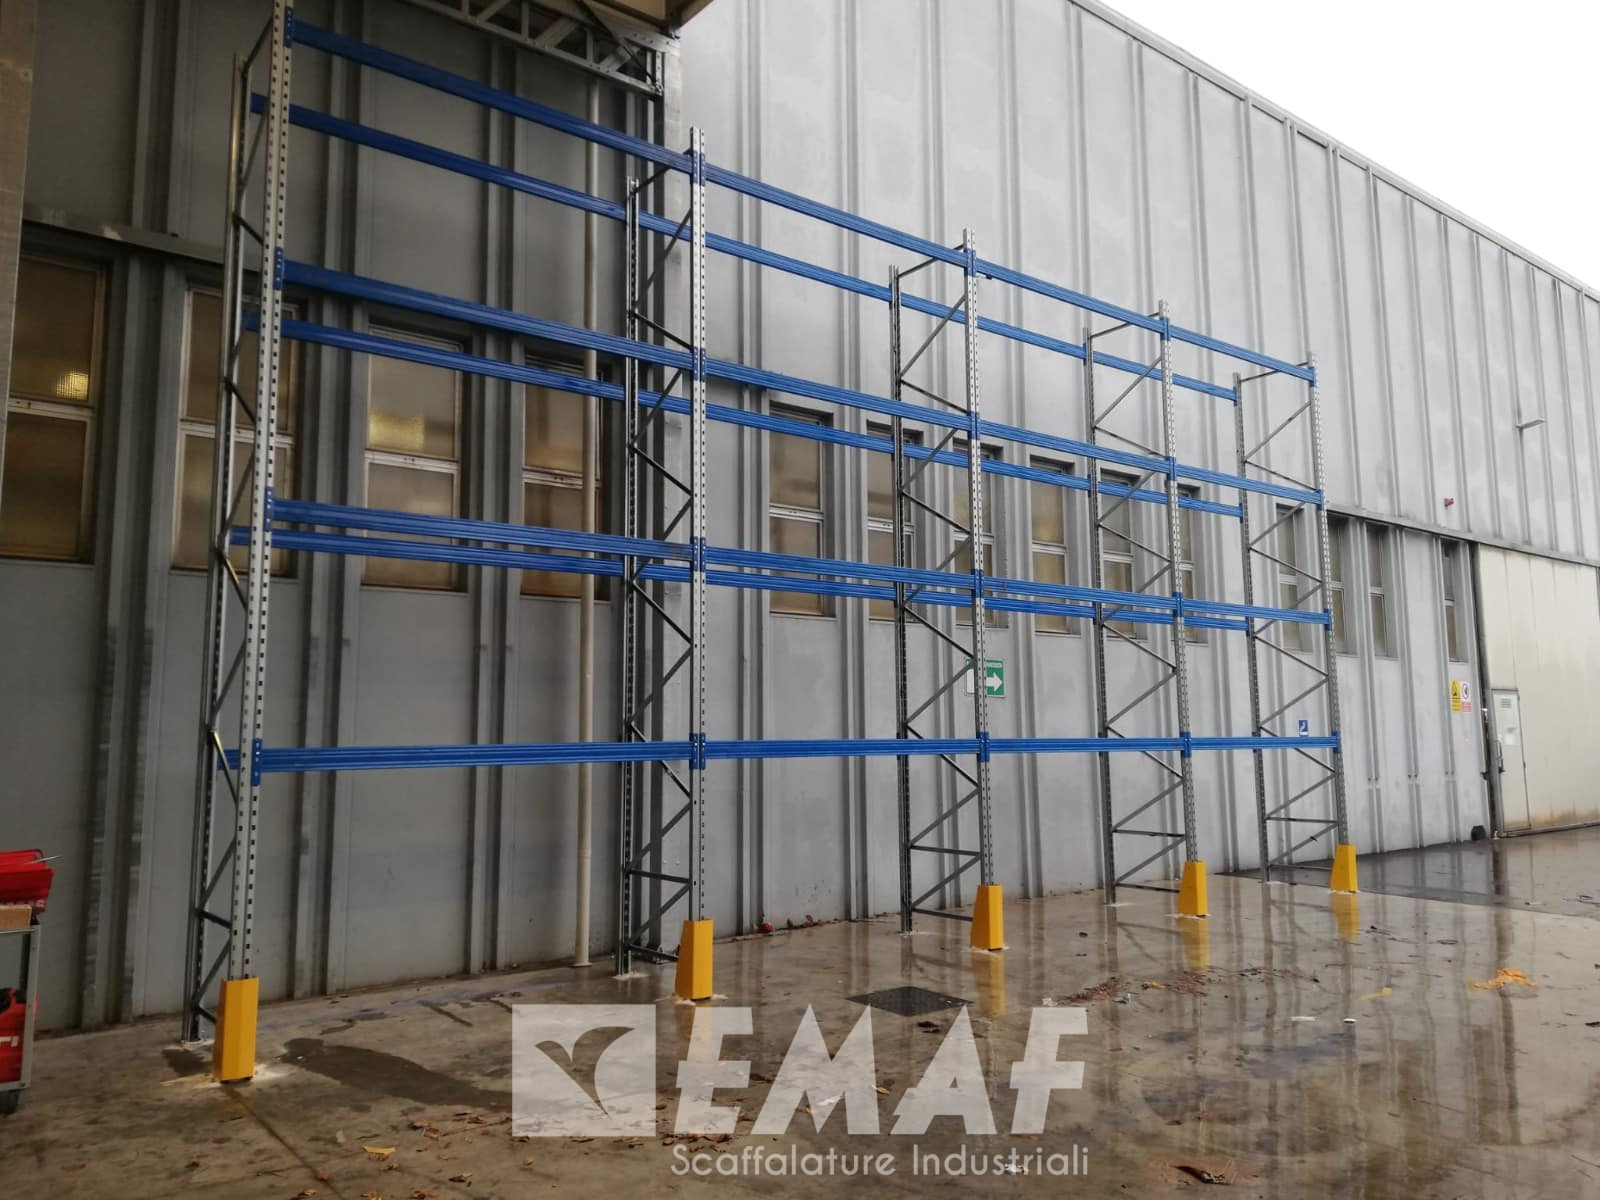 Featured image for “Installation of a Pallet Rack by Emaf Scaffalature Industriali Srl at Adicomp Srl”